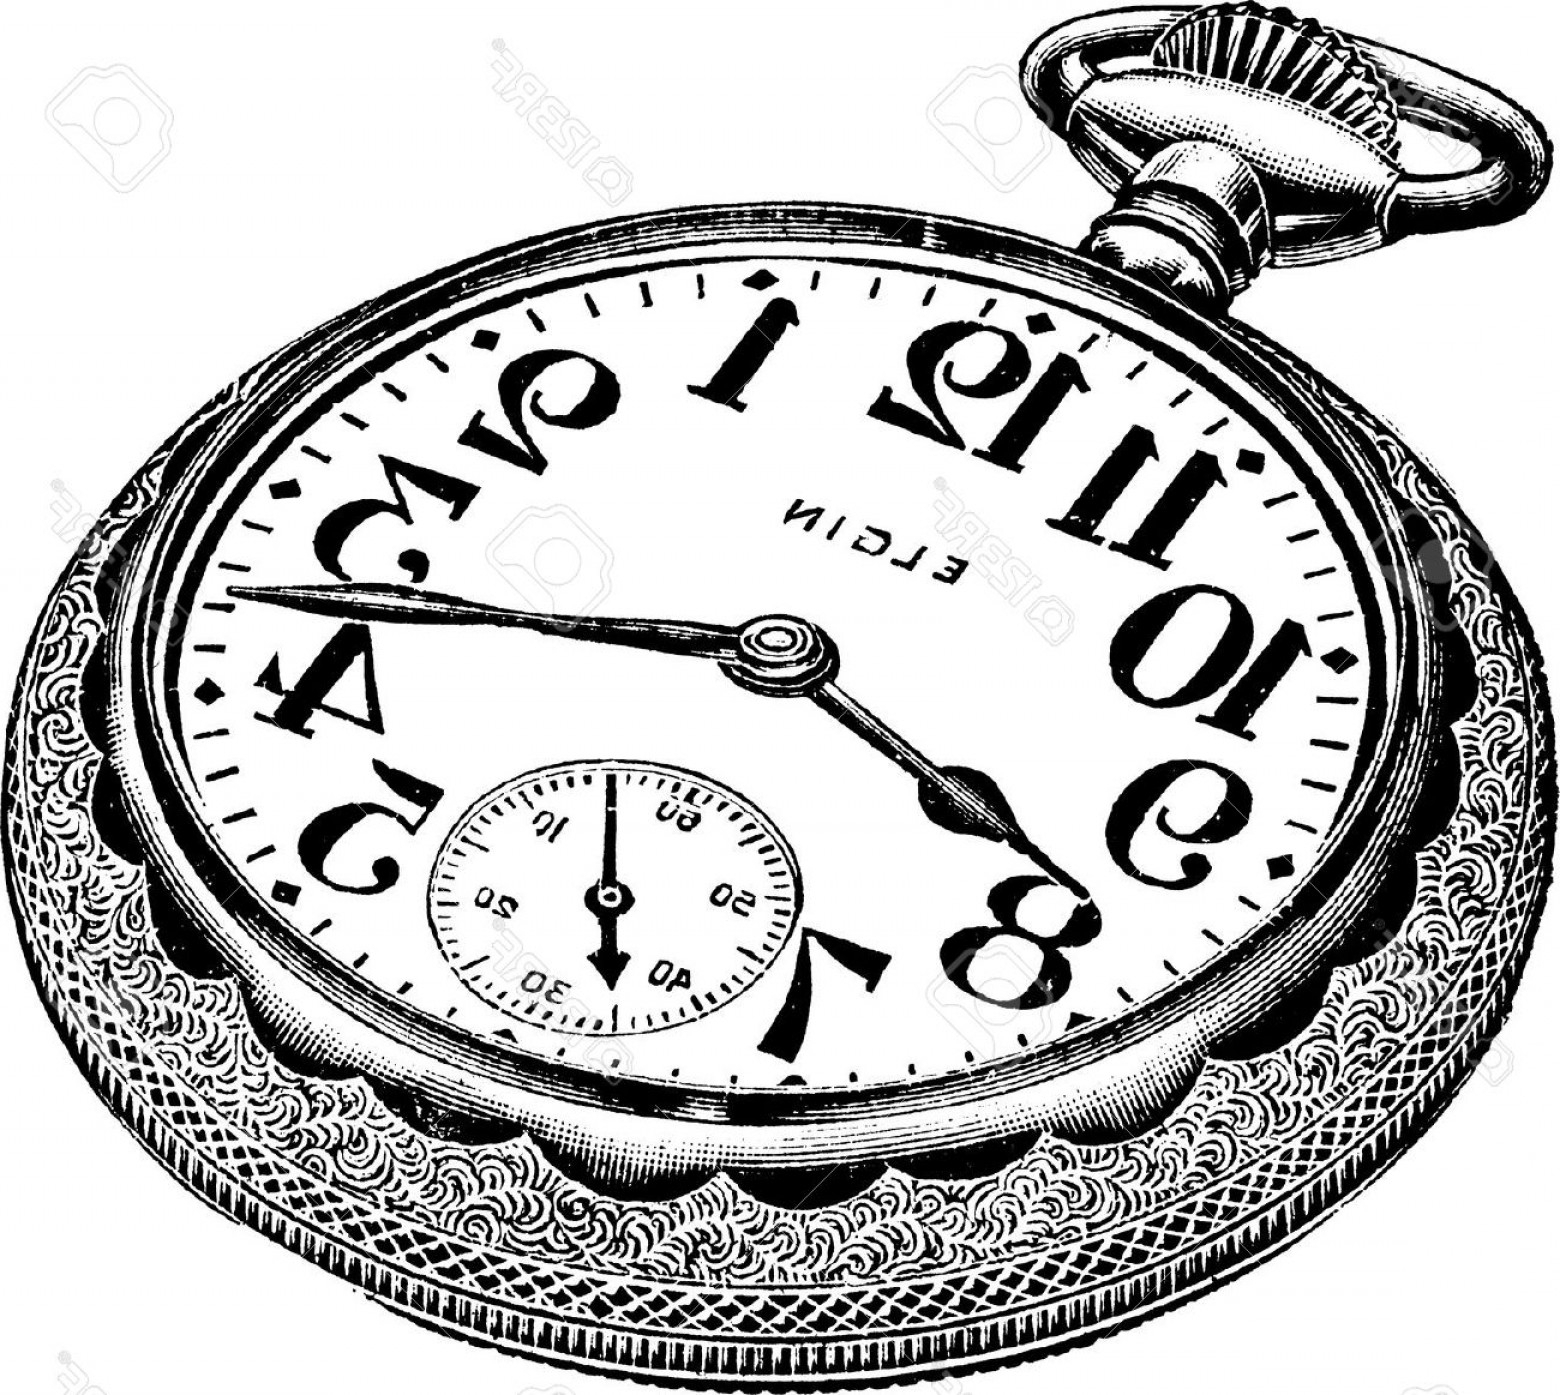 The best free Pocket watch drawing images. Download from 1497 free